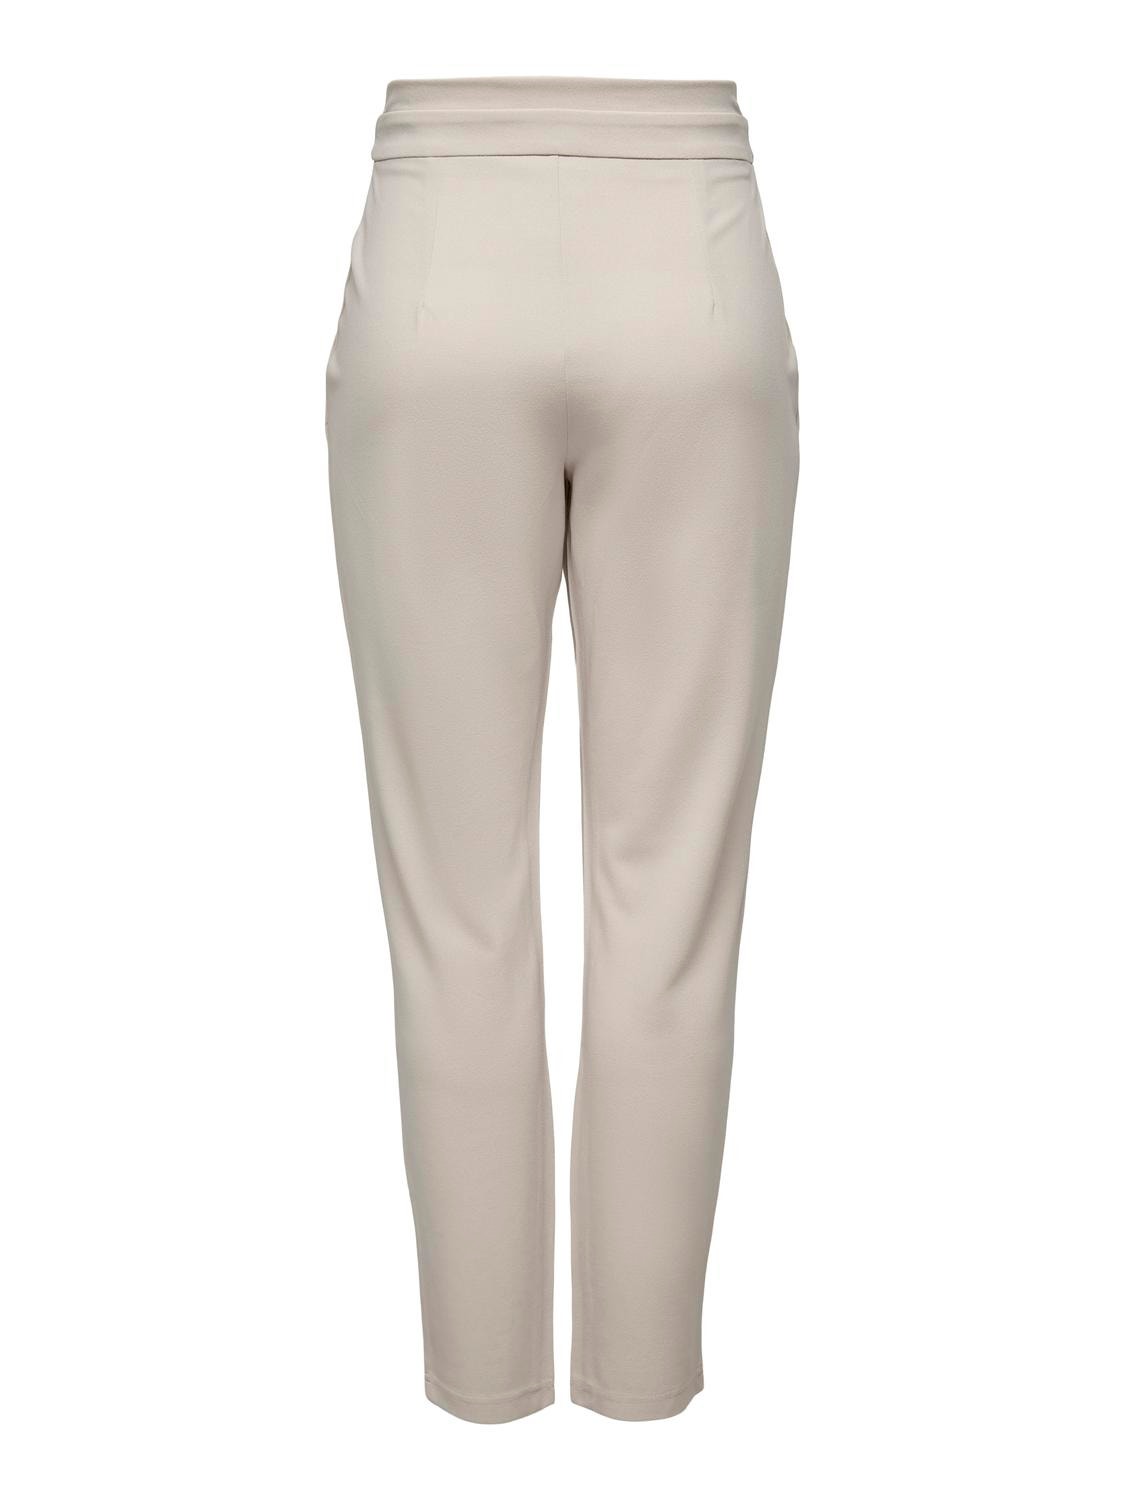 ONLY Pantalons Regular Fit -Chateau Gray - 15205820